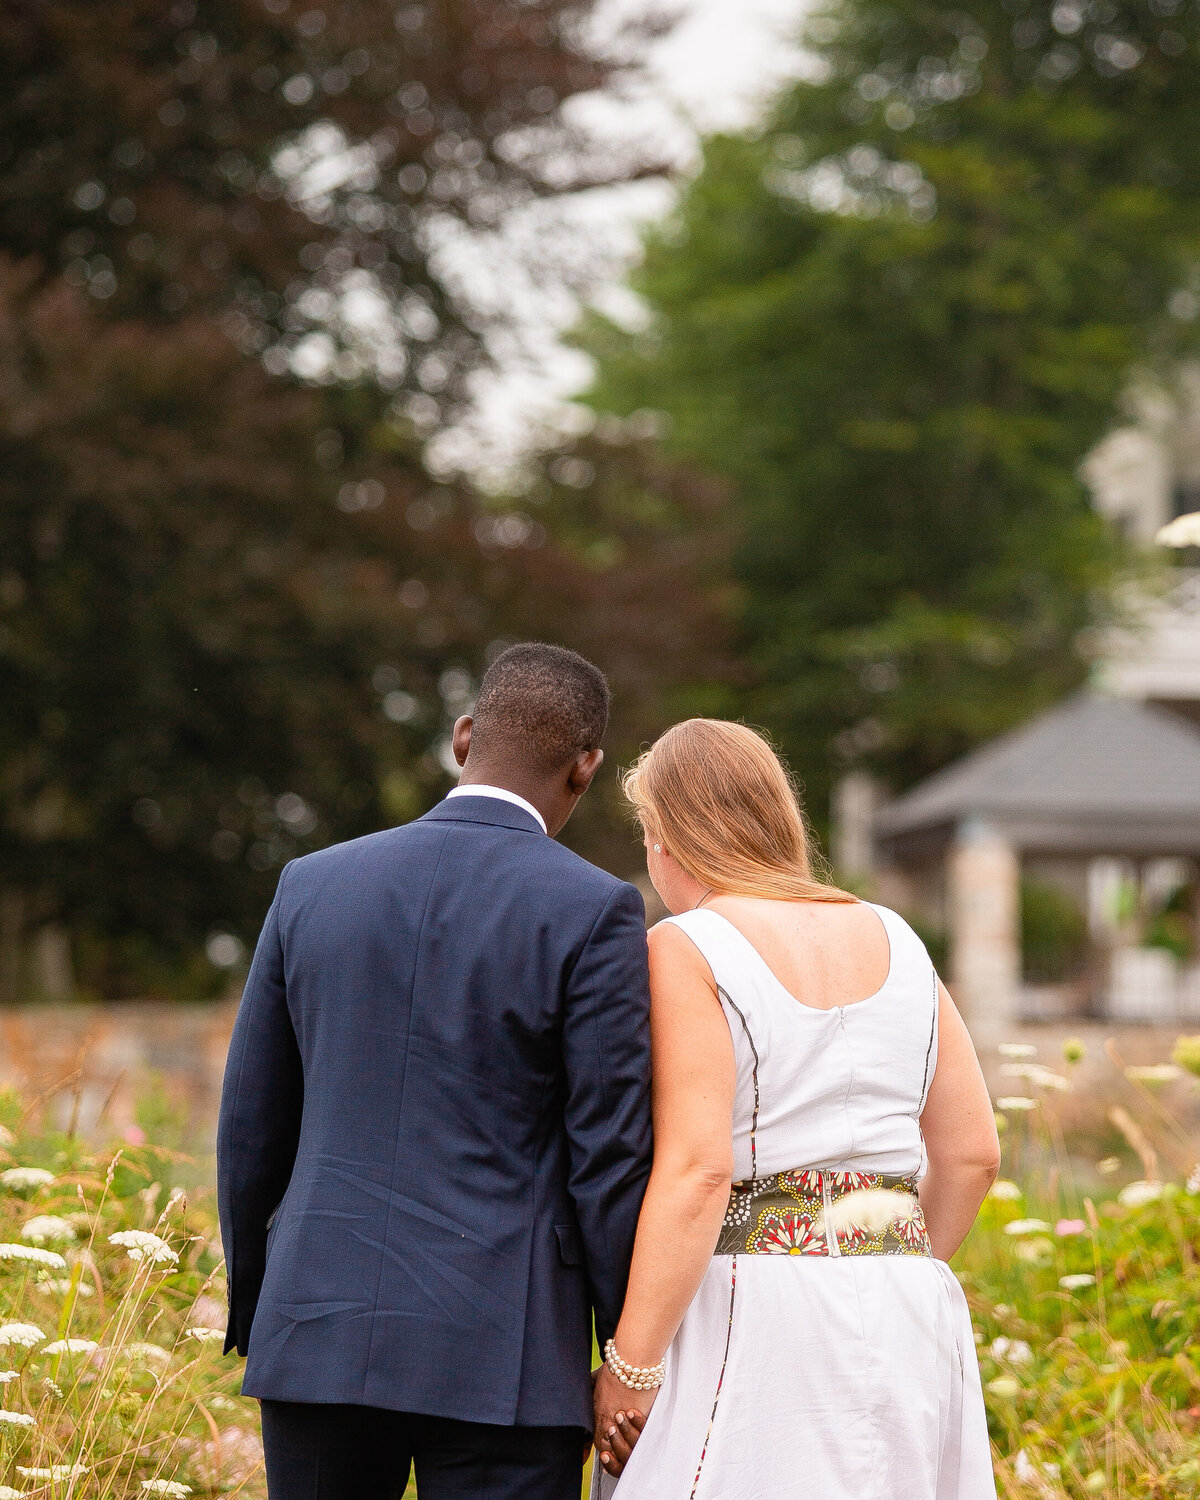 Newlyweds walk through a field of flowers in Stonington, CT.